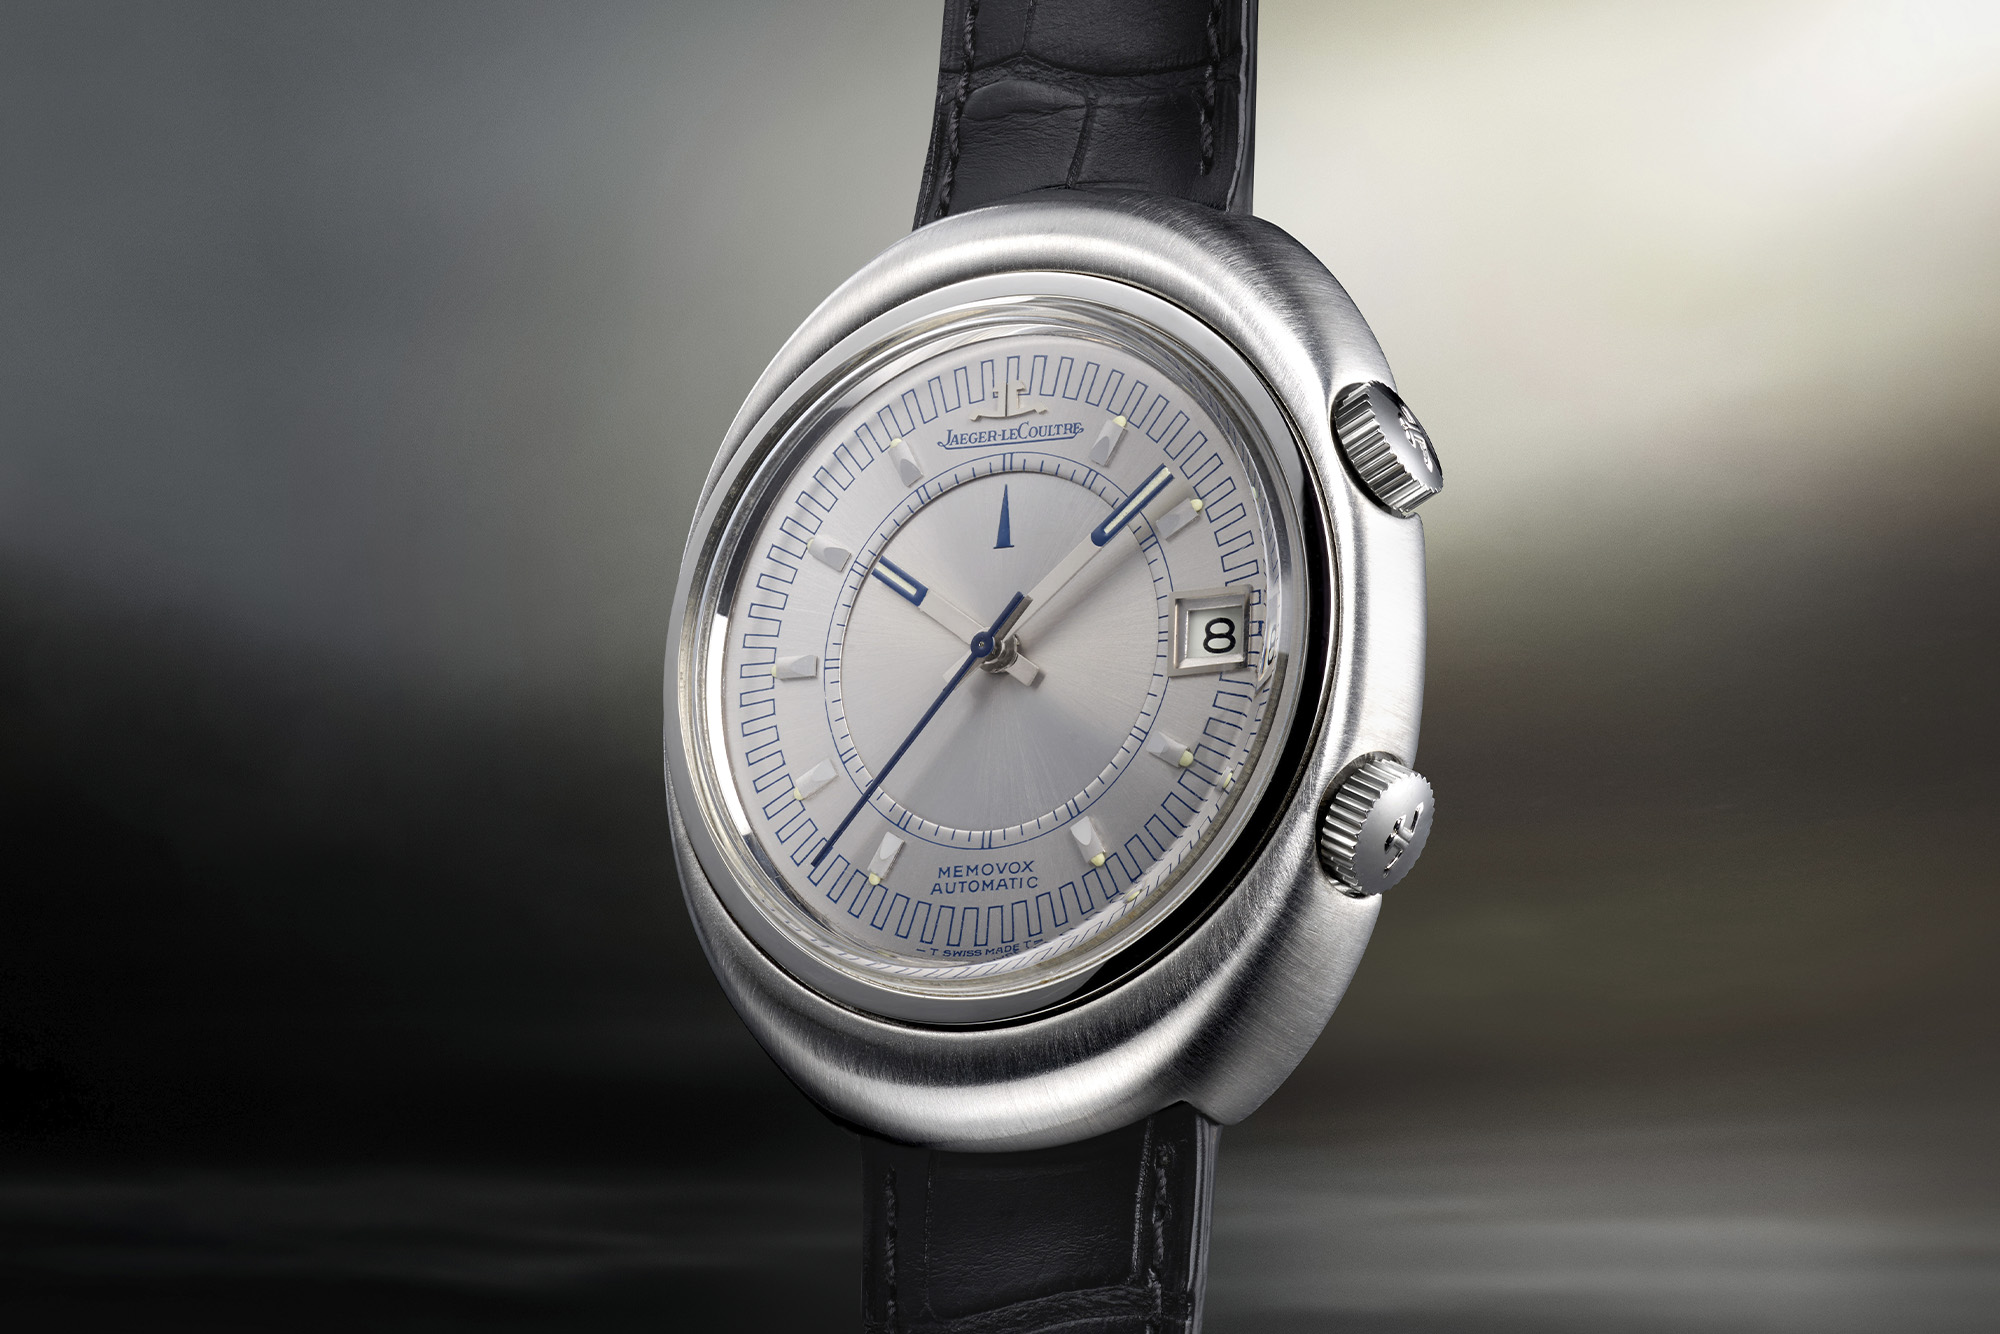 Jaeger-LeCoultre watch silver dial close up black band